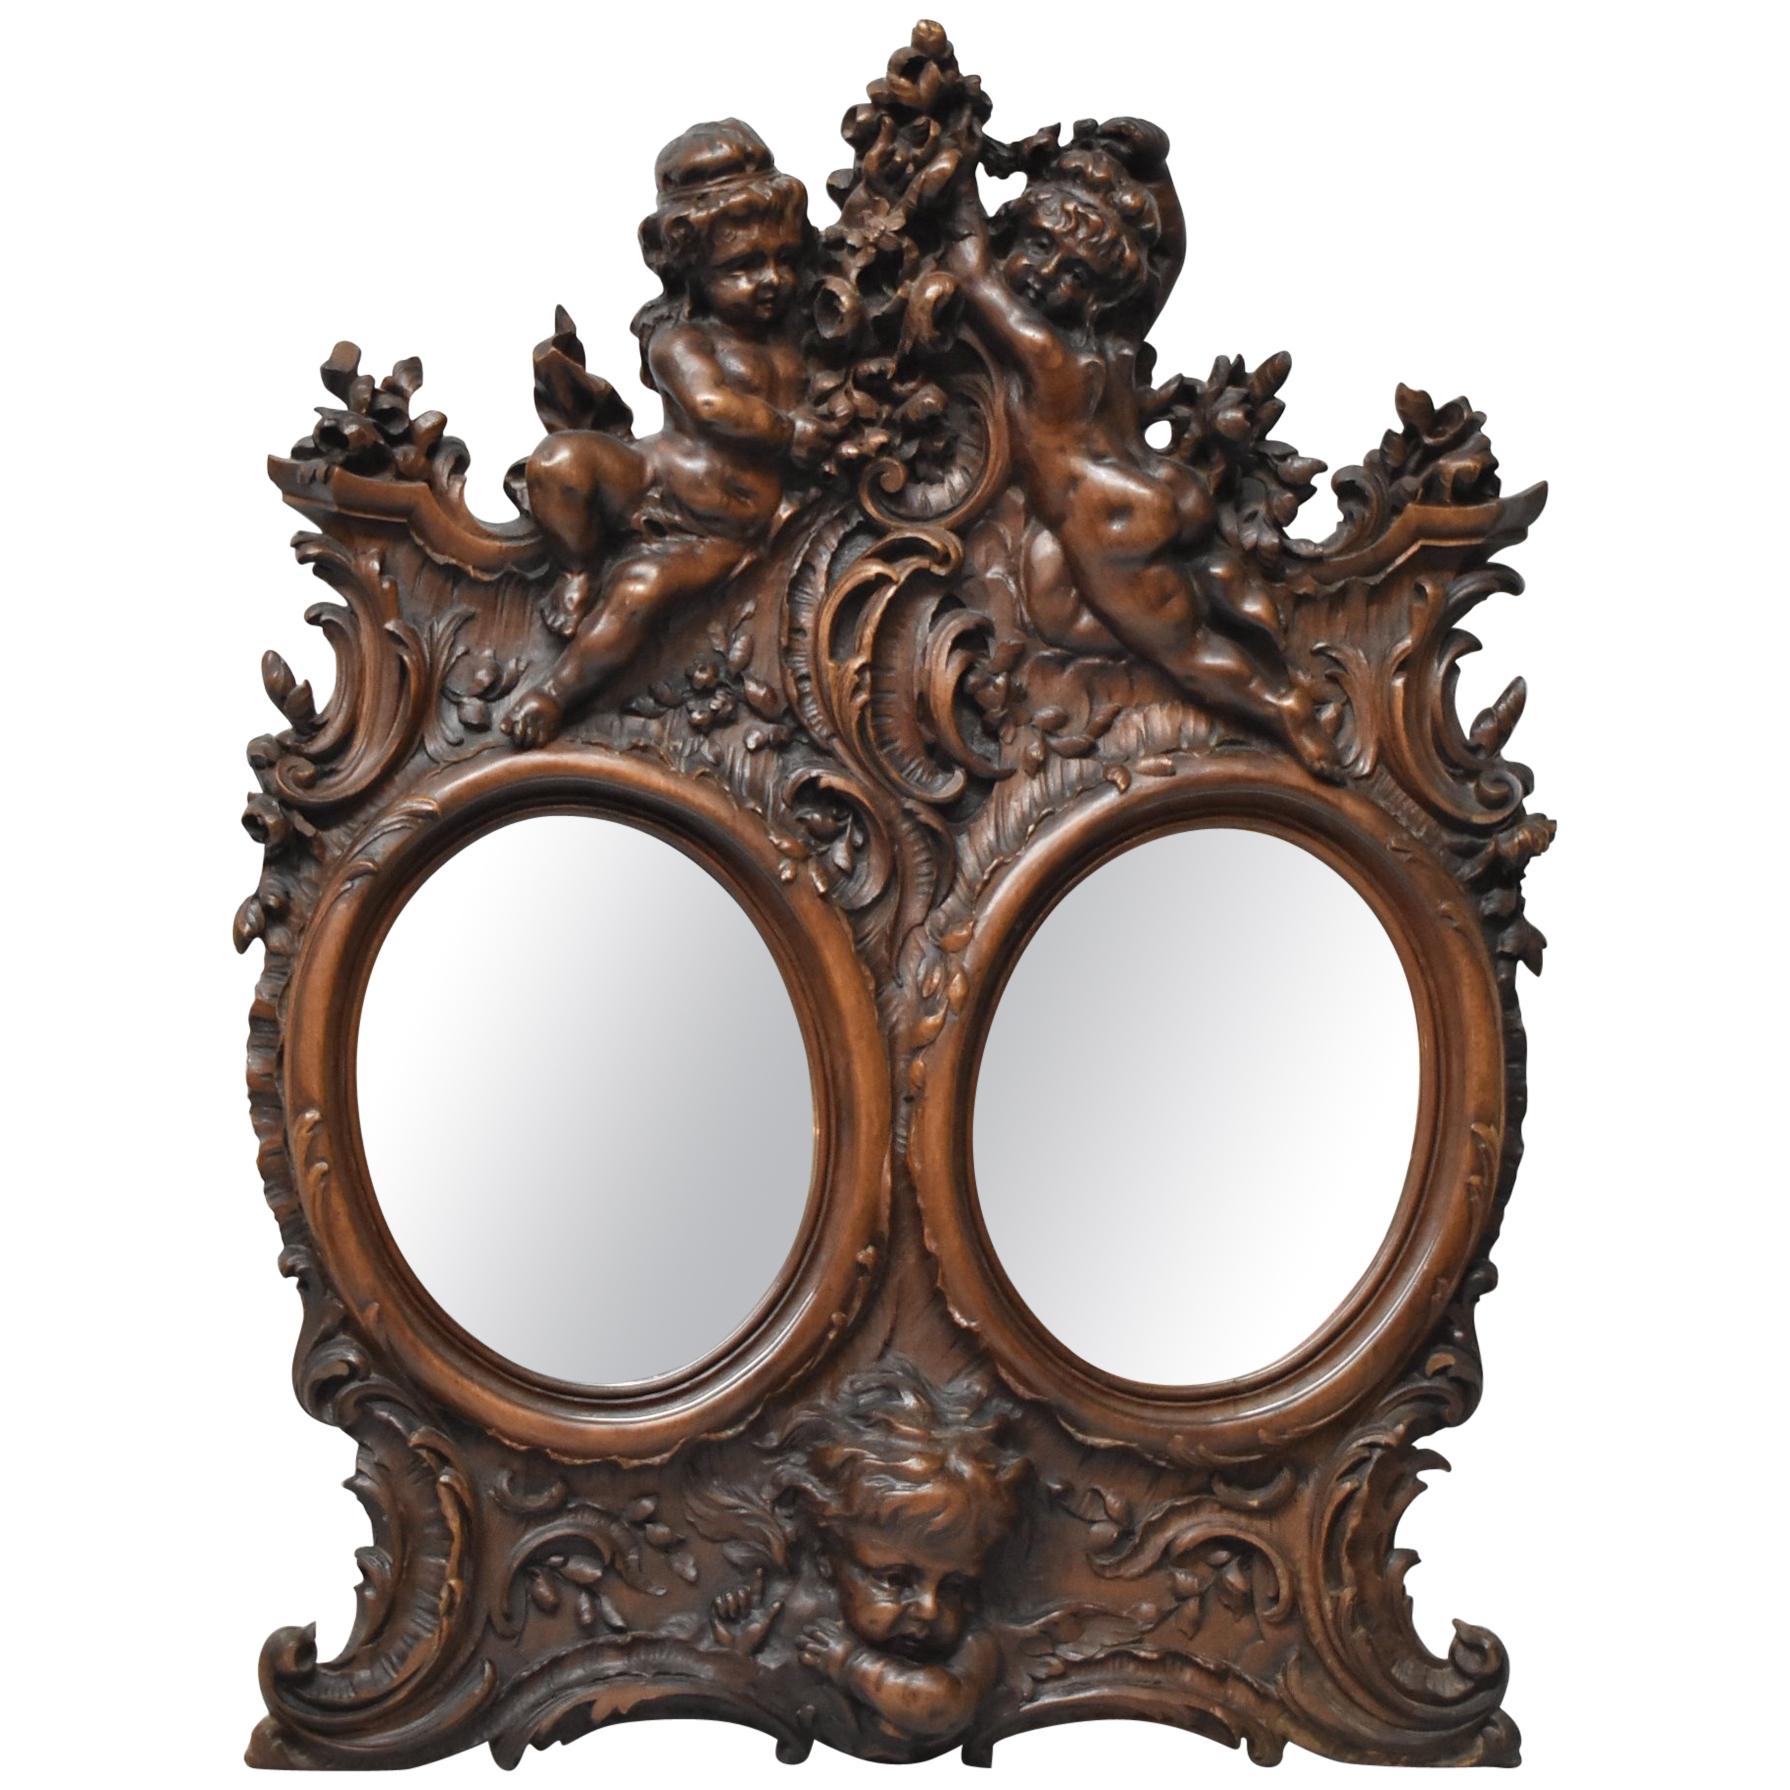 Baroque Style Carved Walnut Double Oval Mirror Picture Frame with Cherubs